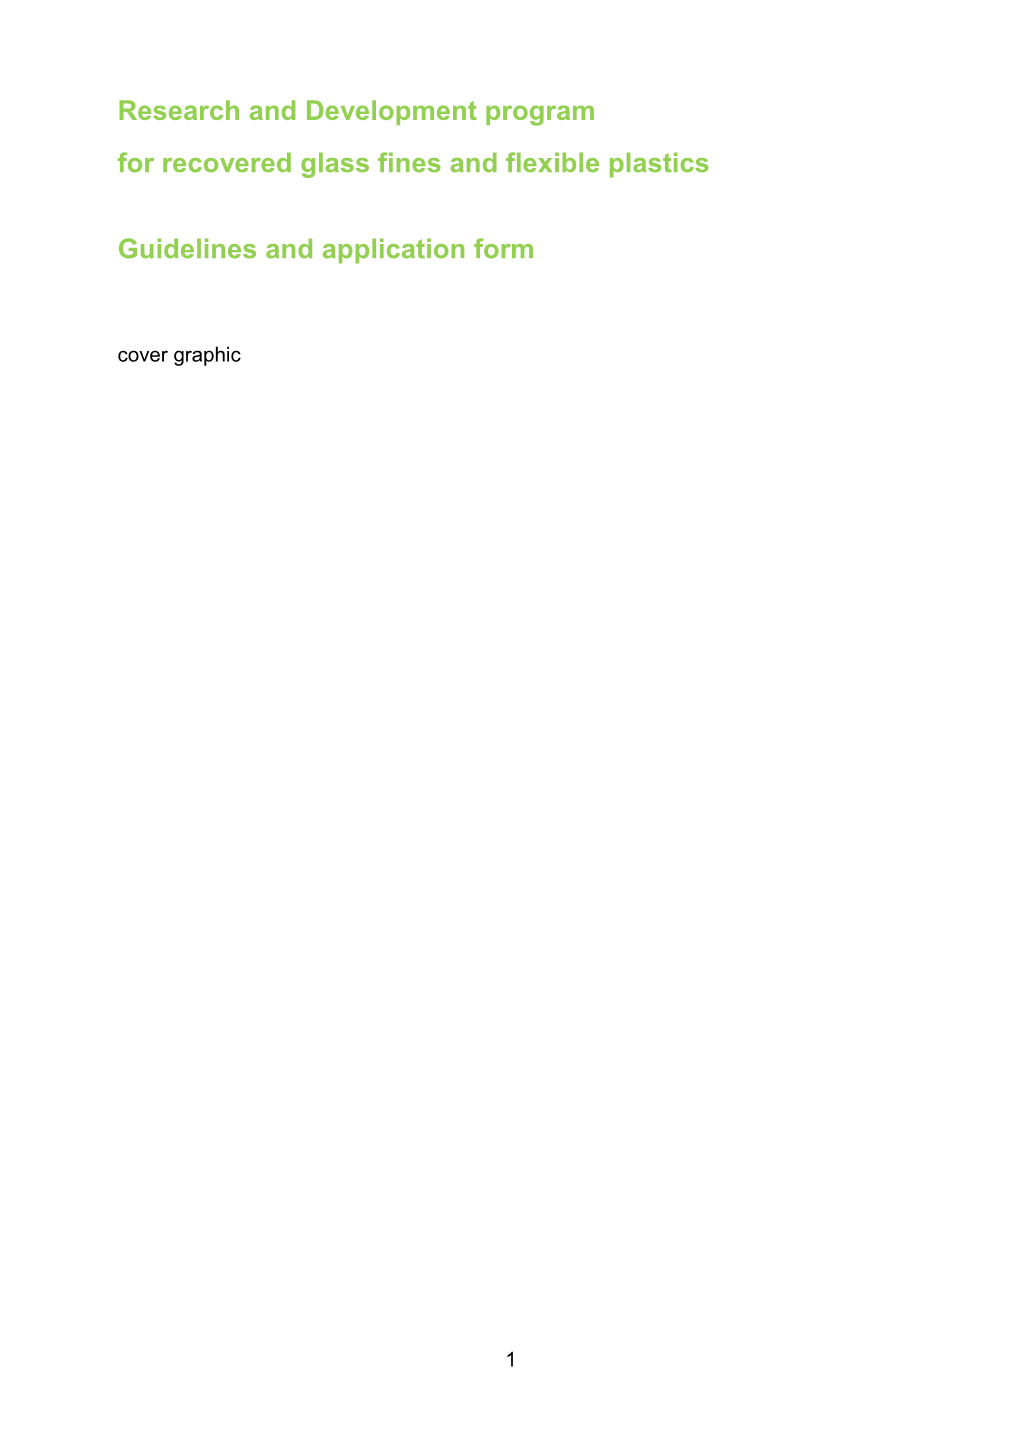 RD Program Guidelines and Application Form Nov 2015 Word